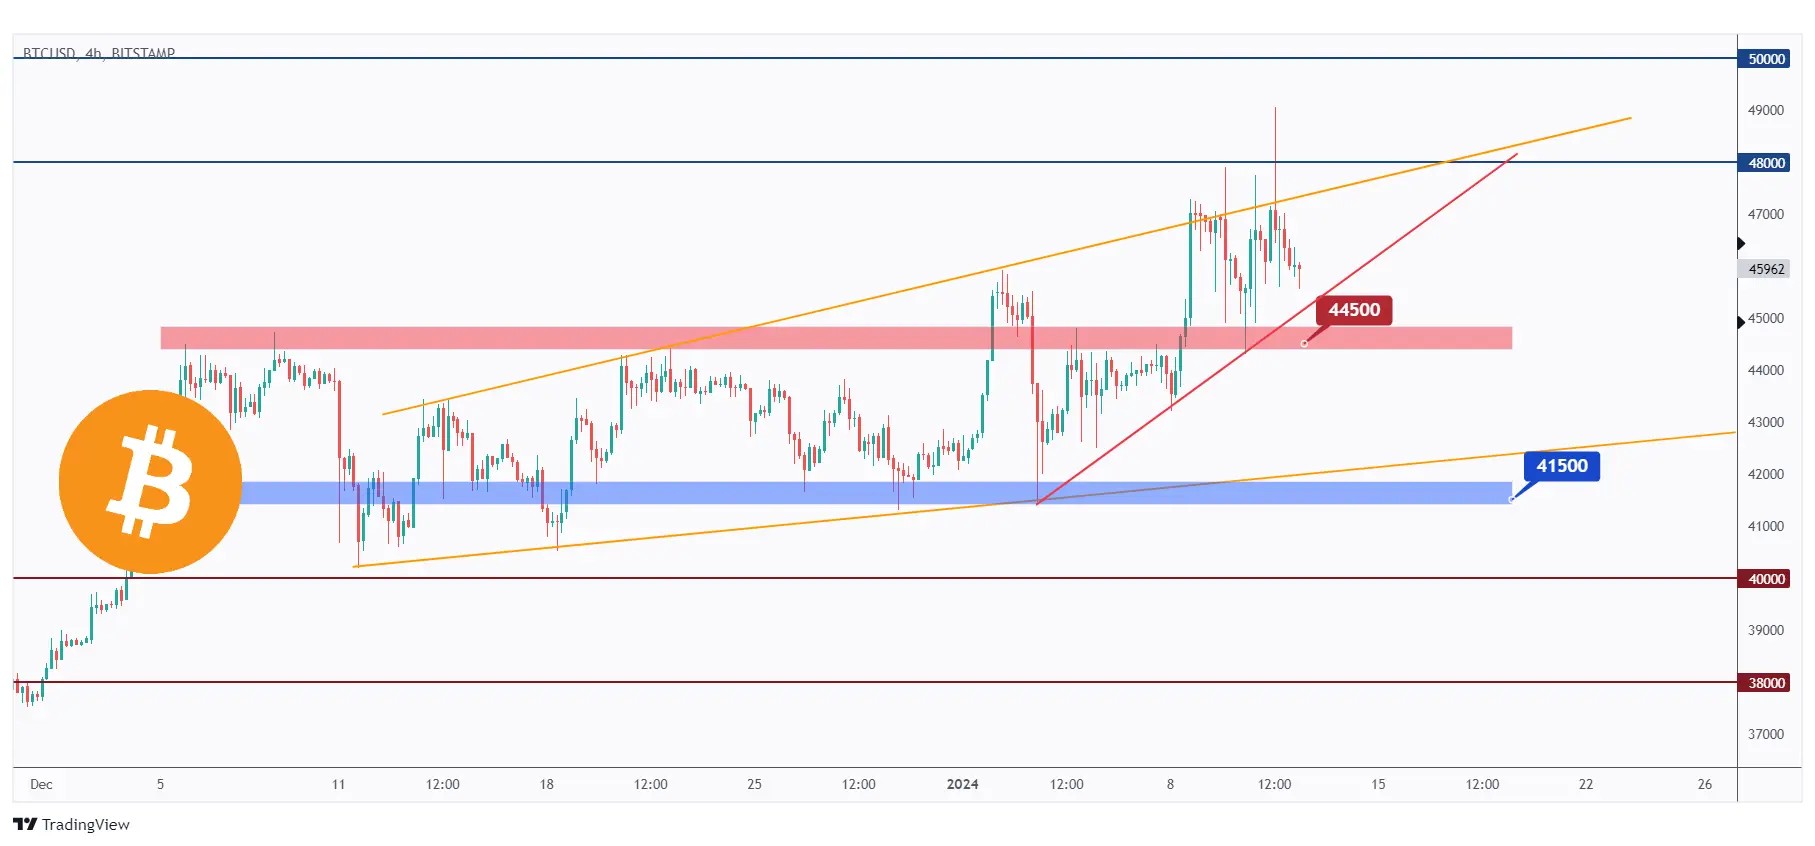 Bitcoin 4h chart showing that it is currently undergoing a correction phase and approaching a robust support at $44,500